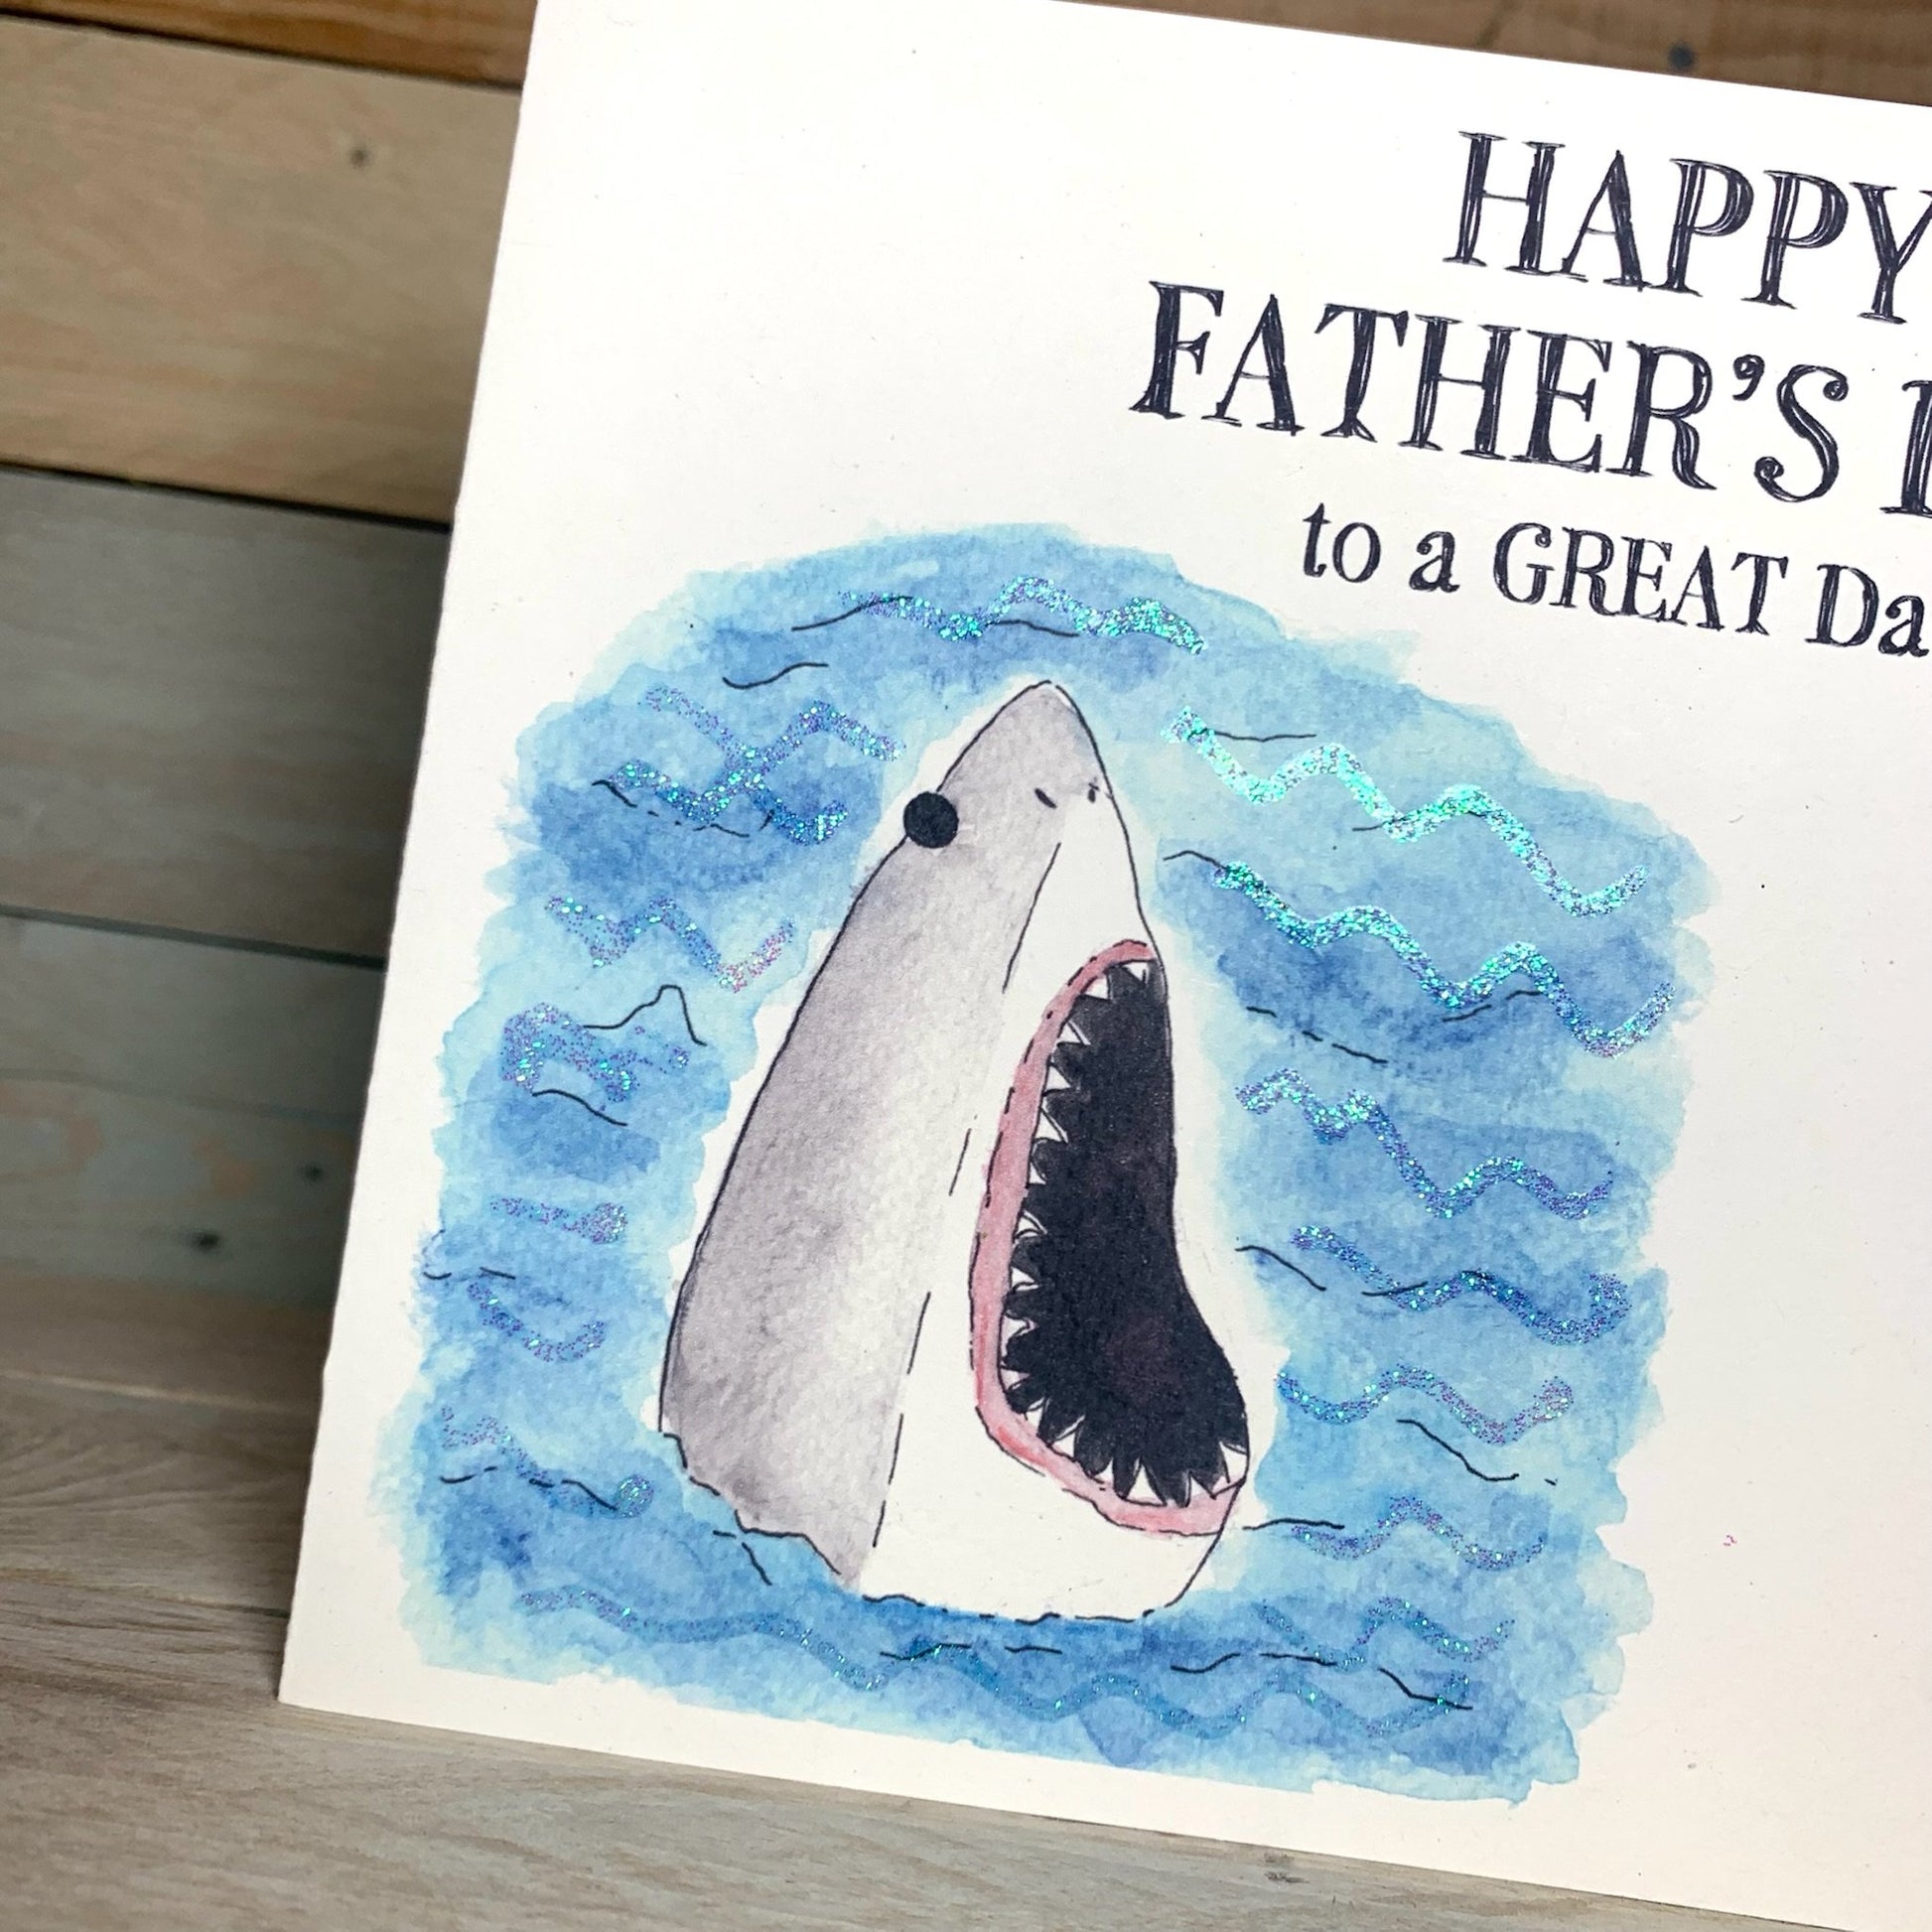 Great White Father's Day Card - Arty Bee Designs 